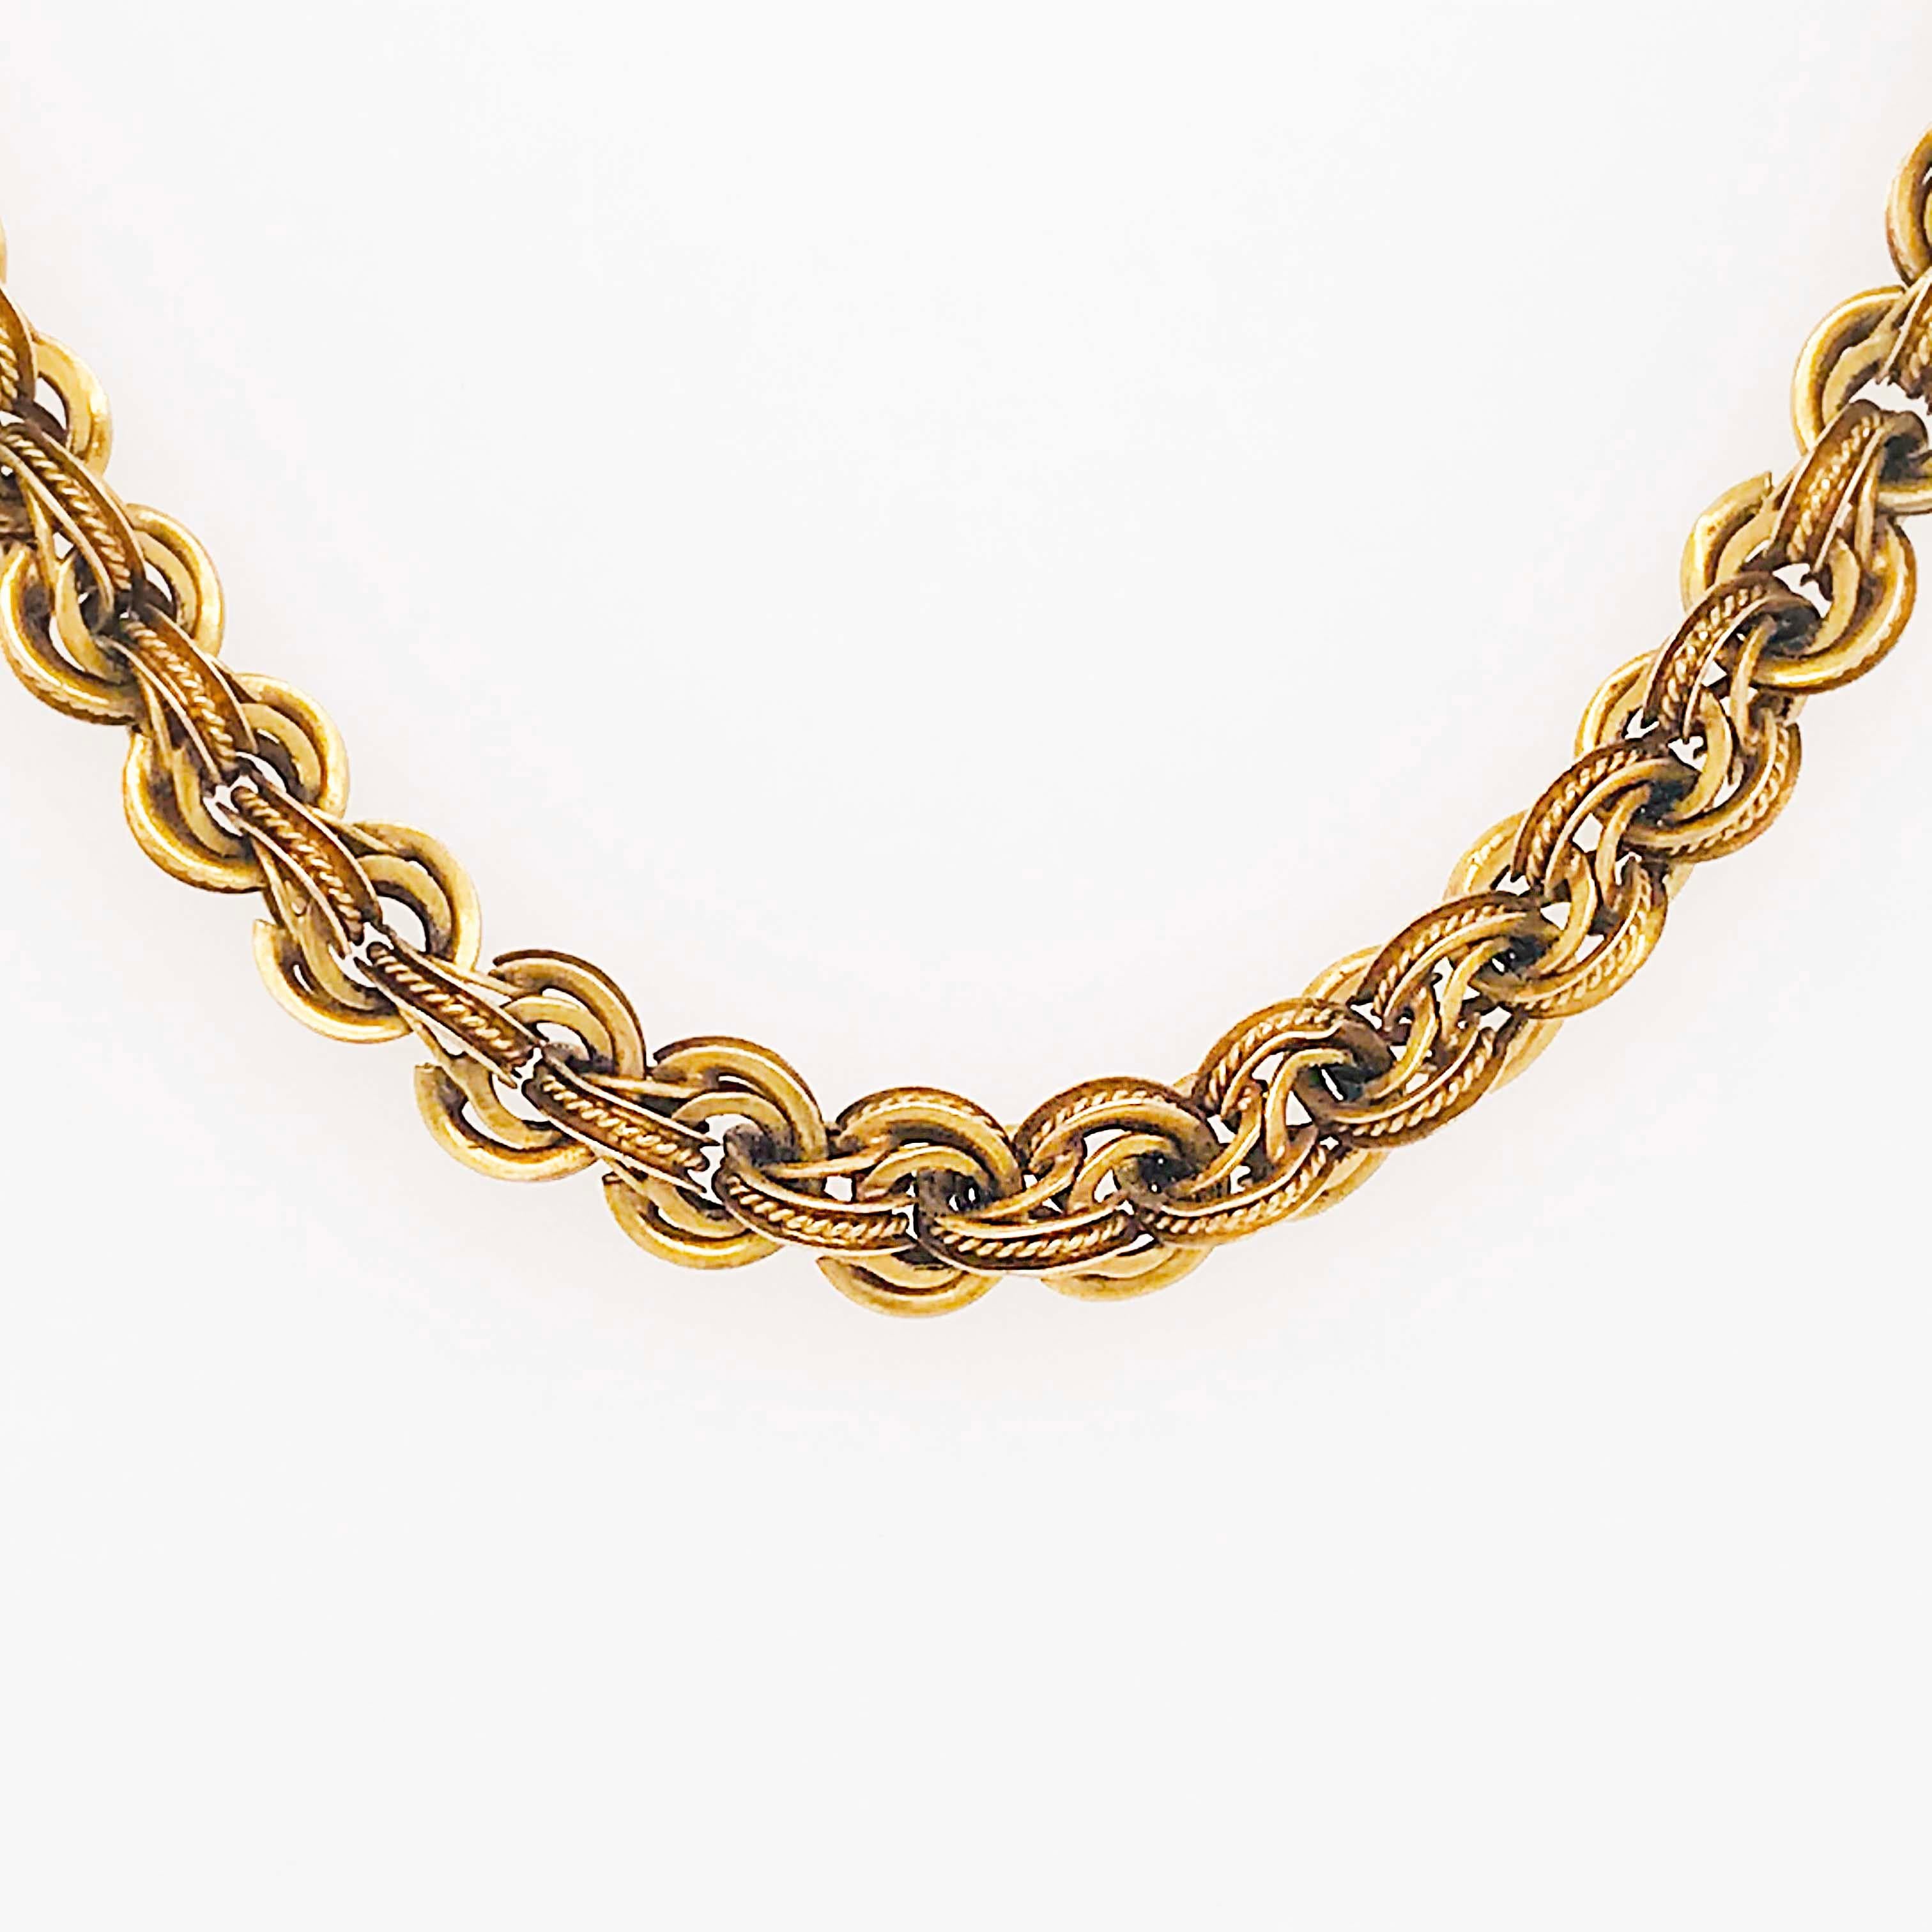 This exquisite antique gold choker is a CIRCA 1910 piece that has been completely hand fabricated and kept in amazing condition. The antique gold choker has one of a kind custom links that are a work of art and formed out of 14k rolled gold plate